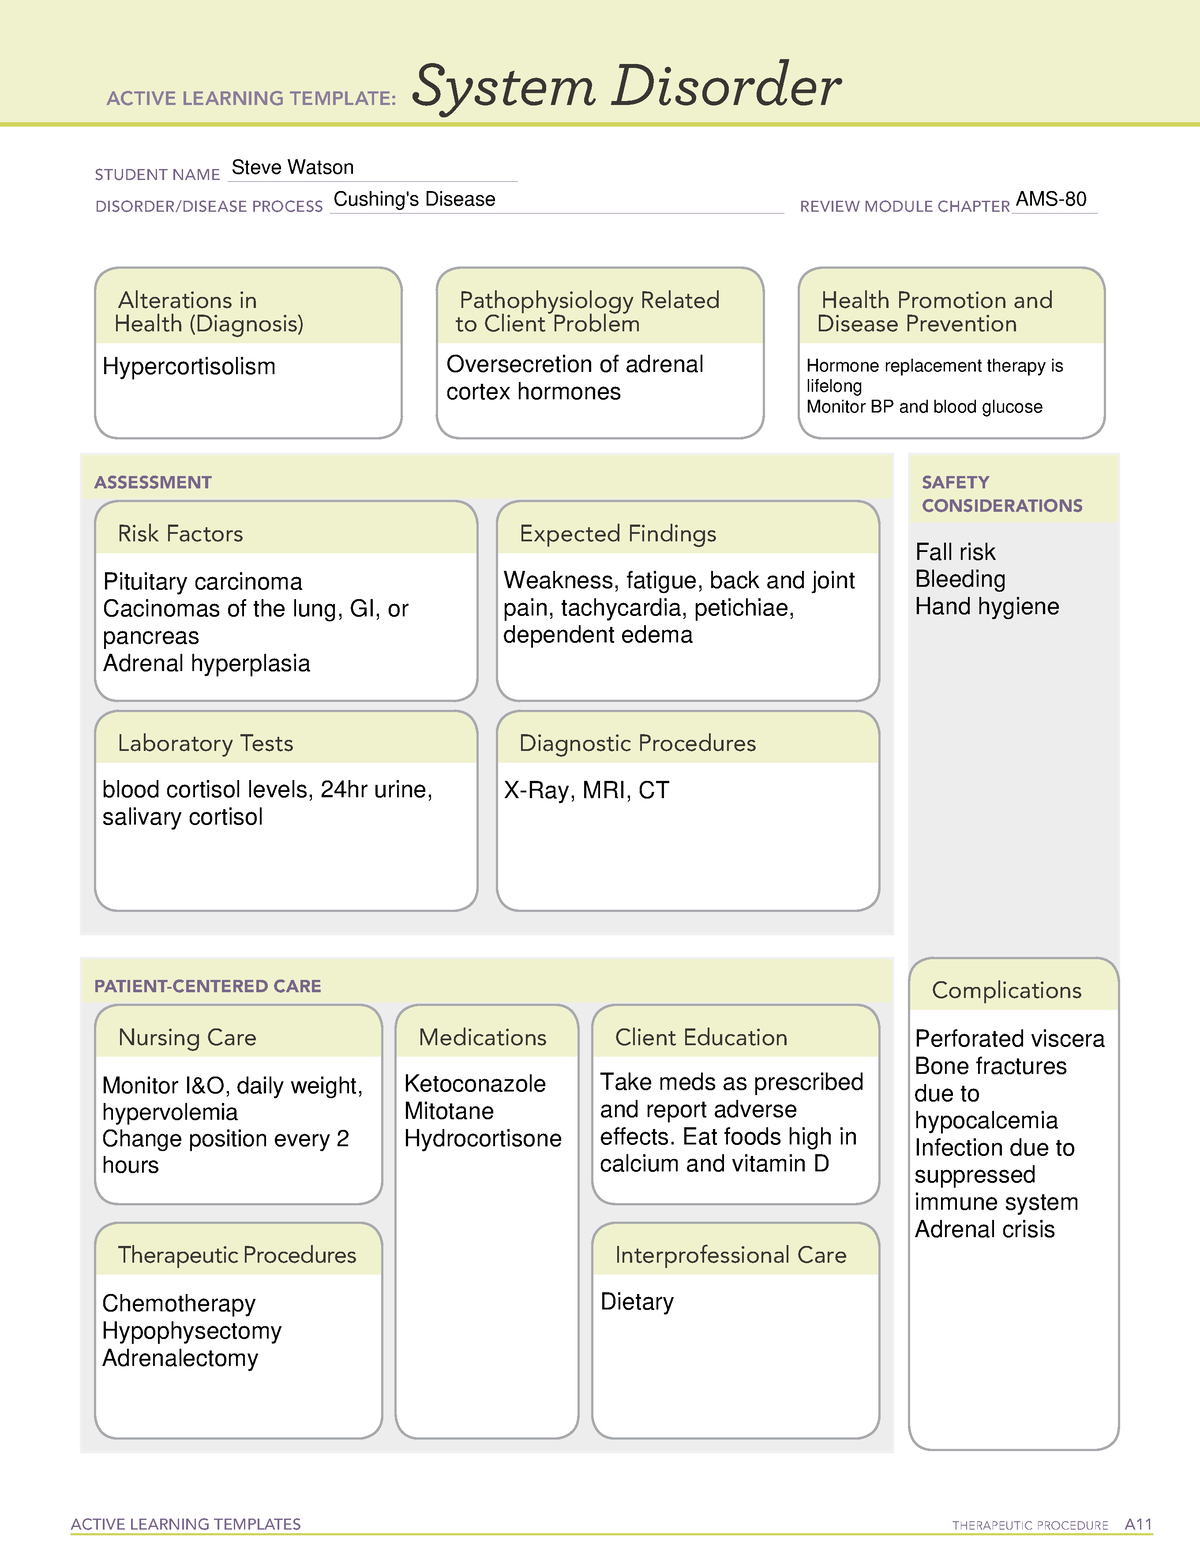 cushing-s-disease-med-sheets-for-ati-assignments-for-fall-2021-active-learning-templates-studocu